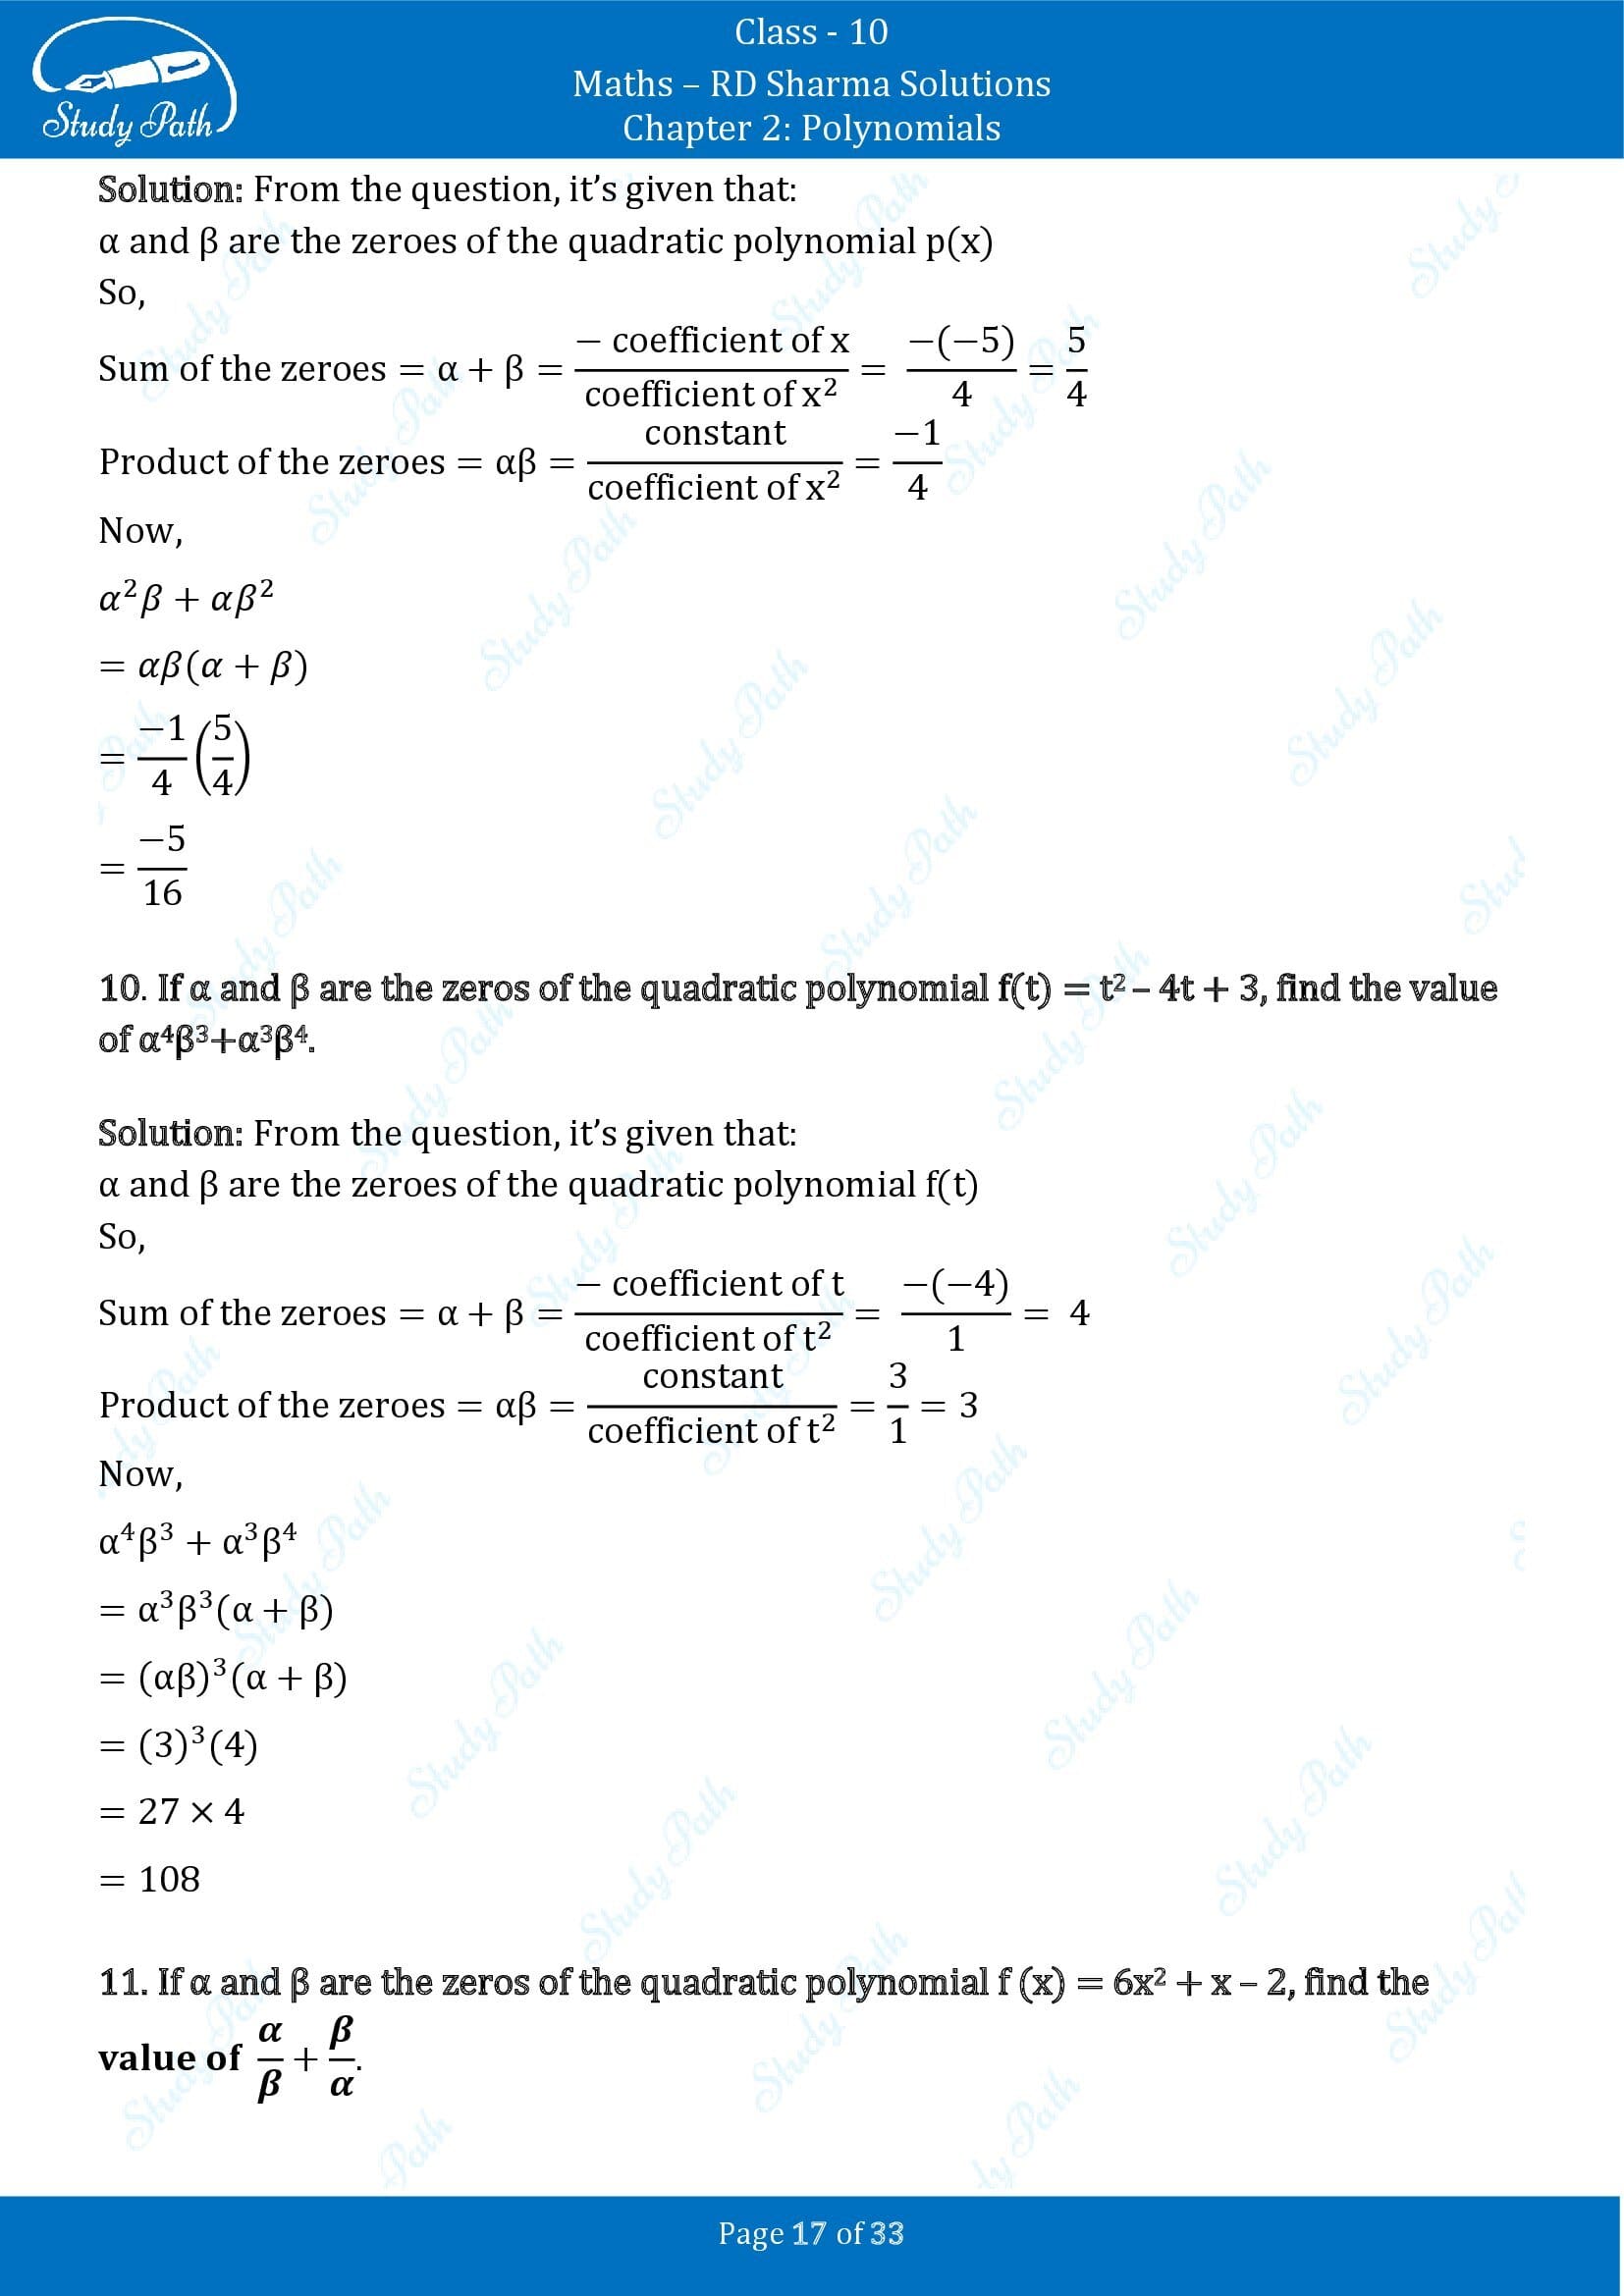 RD Sharma Solutions Class 10 Chapter 2 Polynomials Exercise 2.1 00017